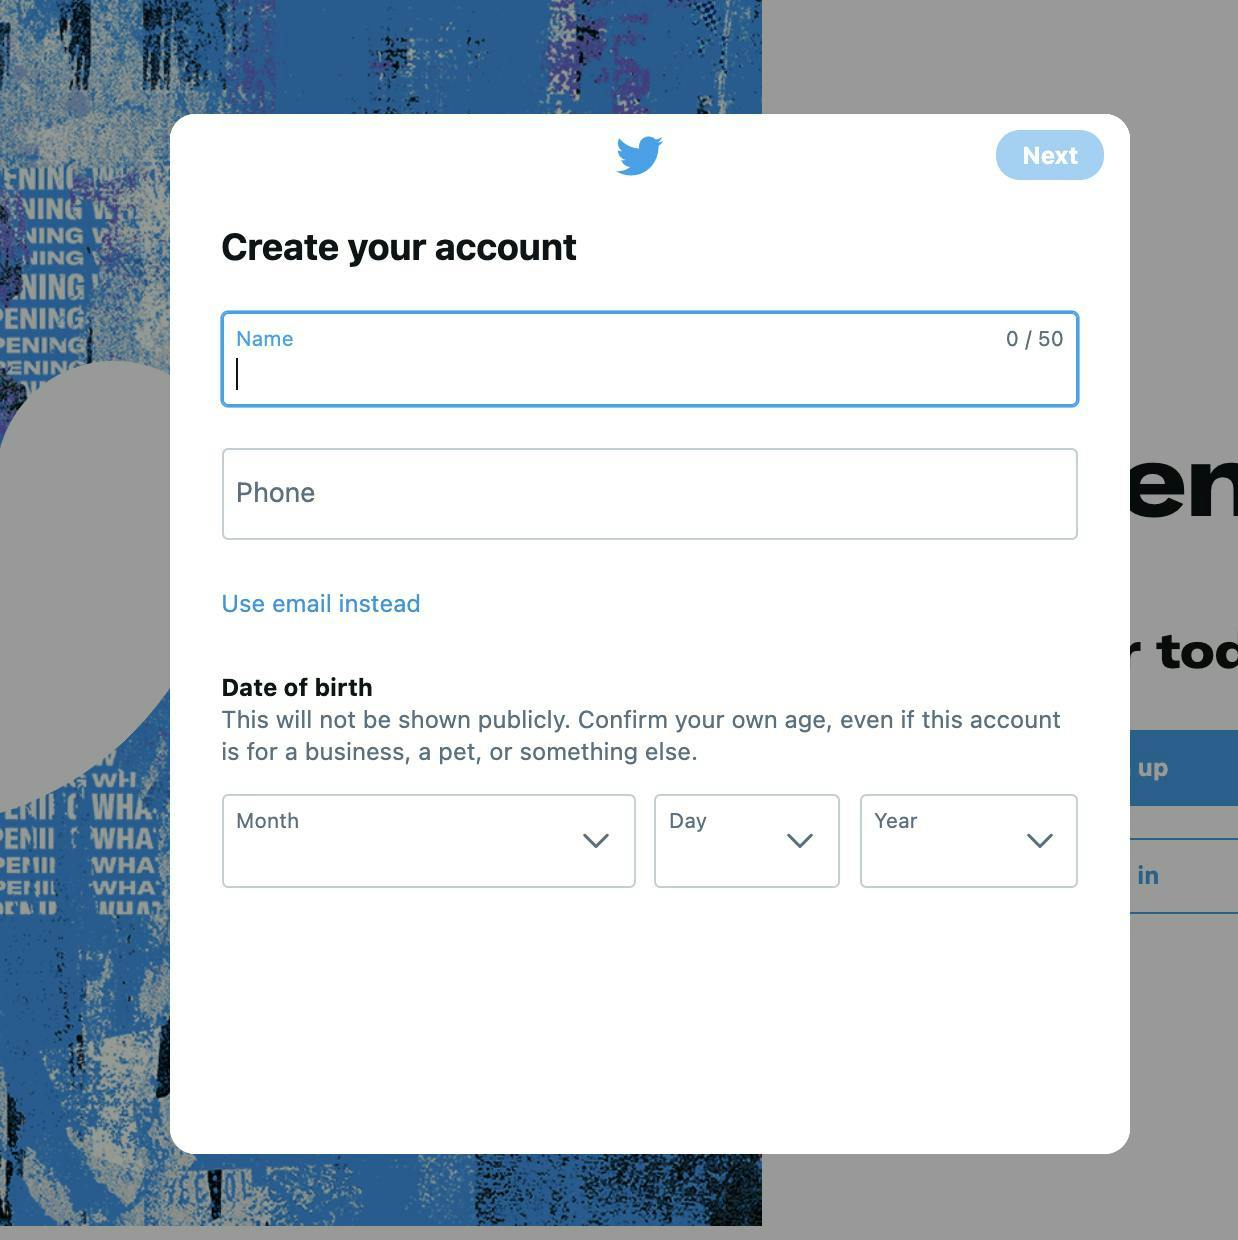 Step 2 for creating a Twitter account with fields for name and phone number